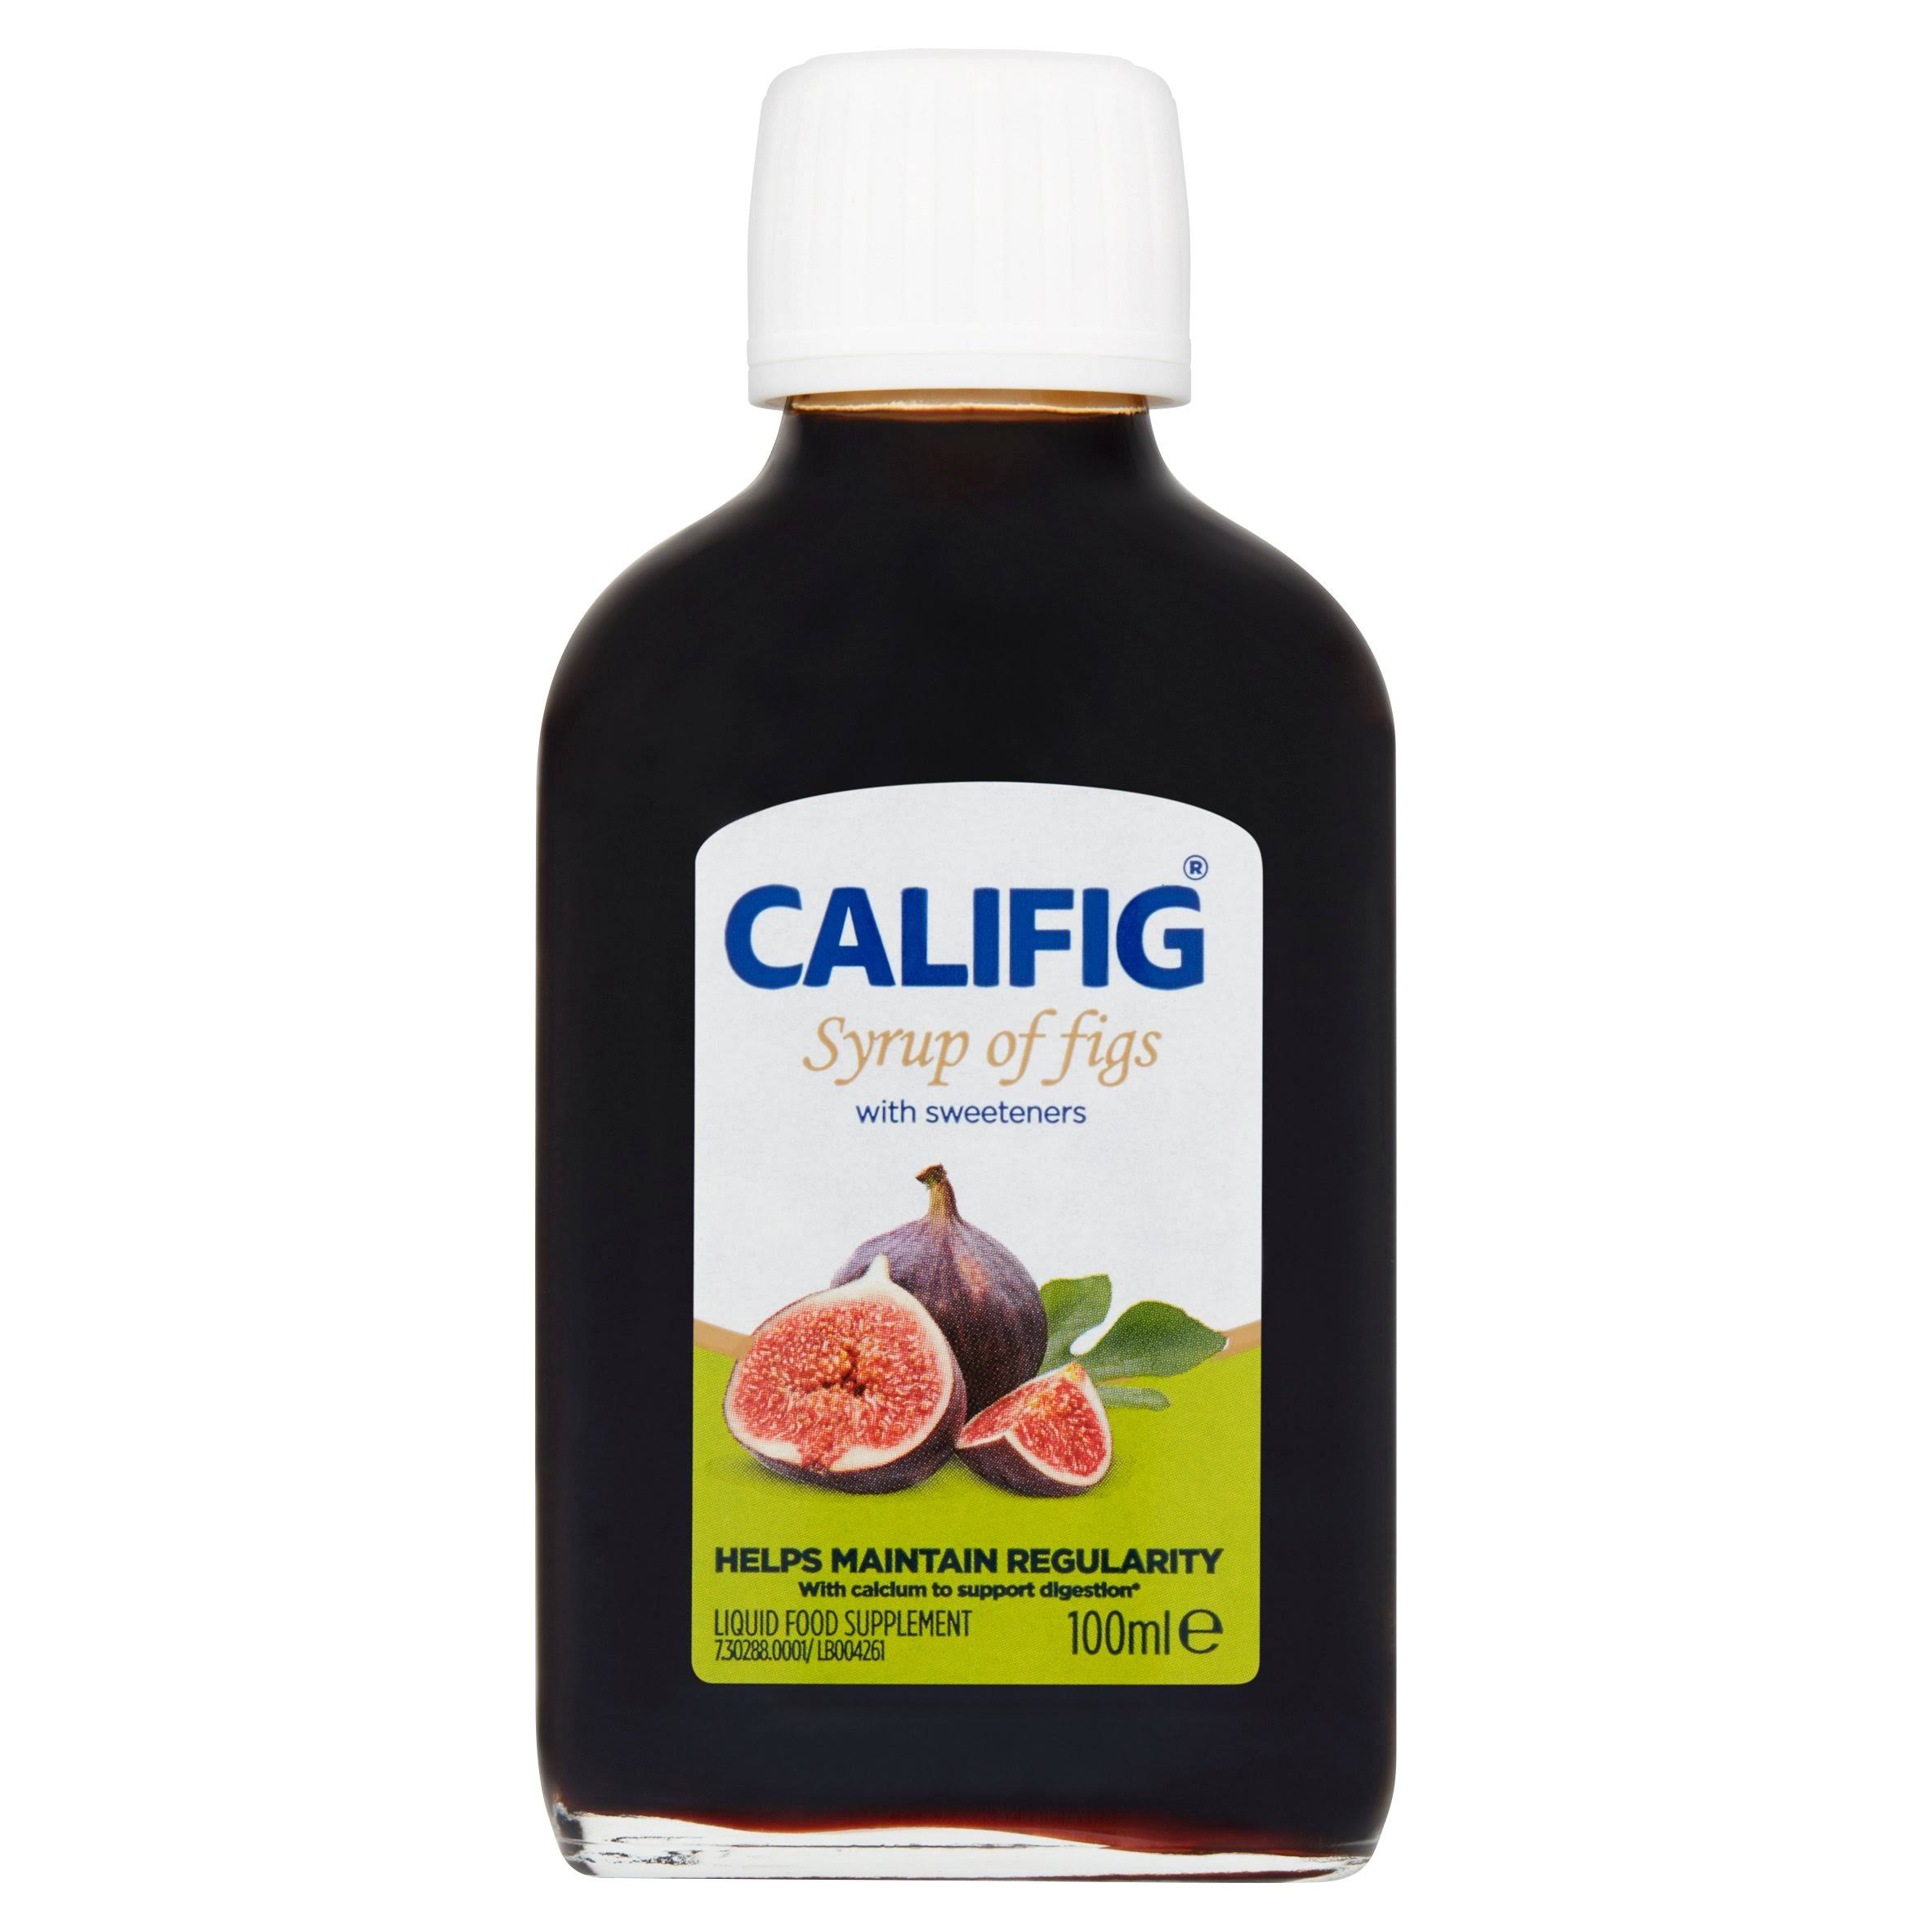 Califig Syrup of Figs Liquid Food Supplement - 100ml